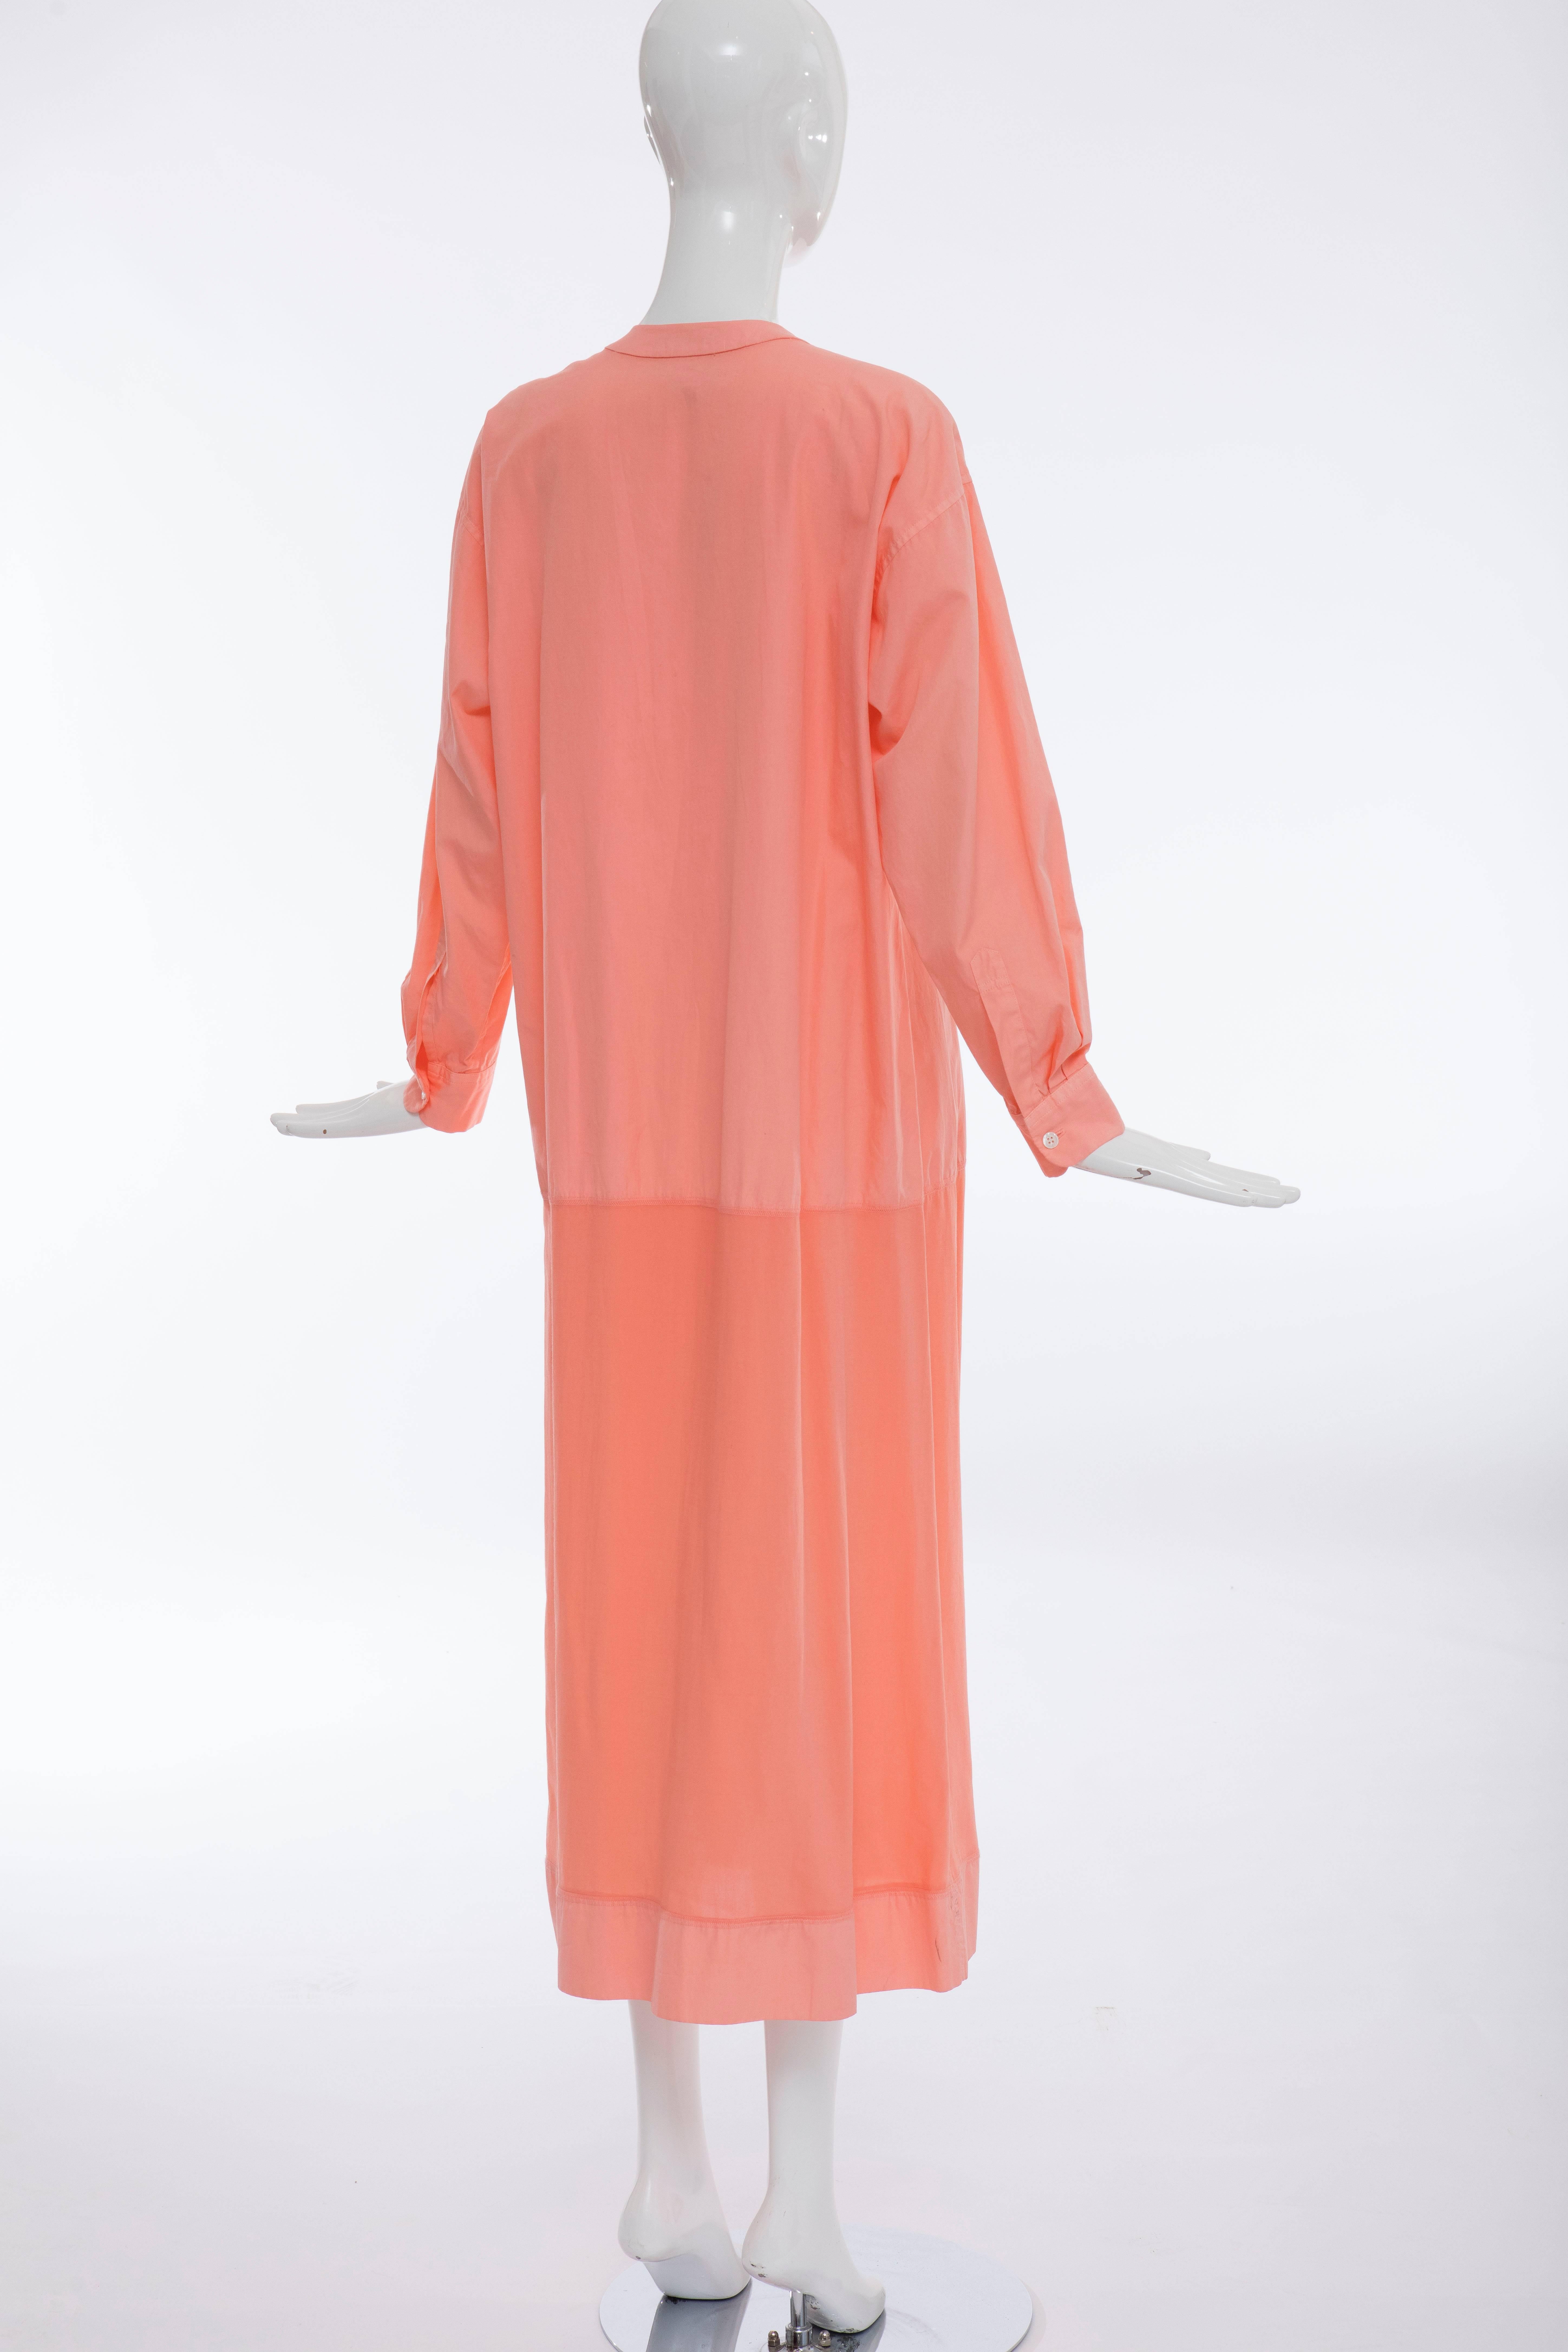 Issey Miyake Cotton Button Front Long Dress, Spring - Summer 1995 In Excellent Condition For Sale In Cincinnati, OH